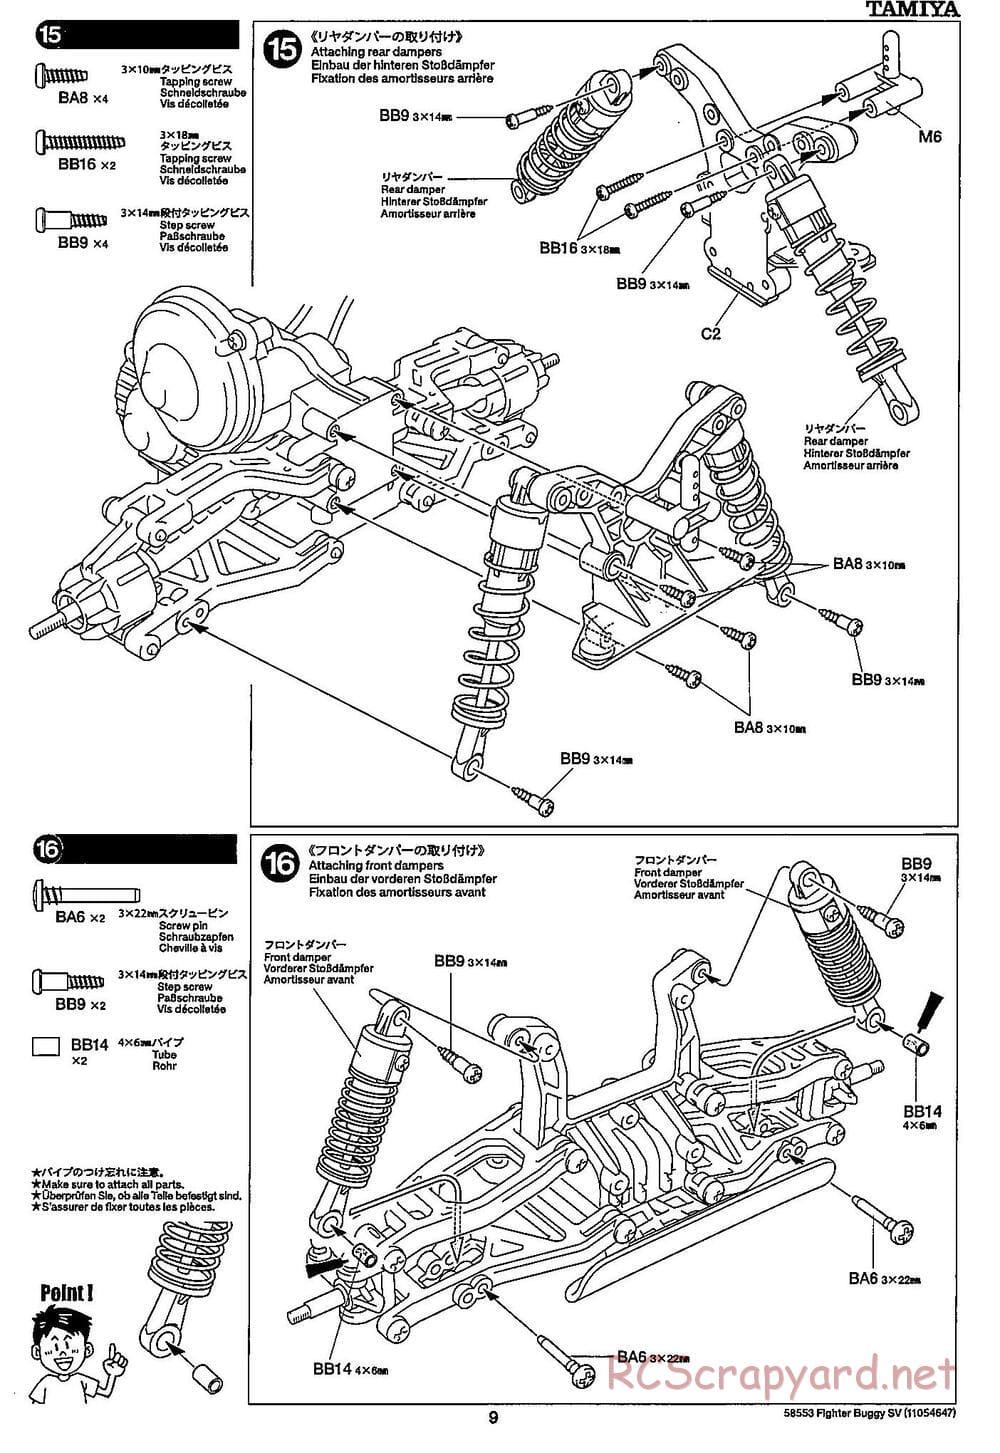 Tamiya - Fighter Buggy SV Chassis - Manual - Page 9